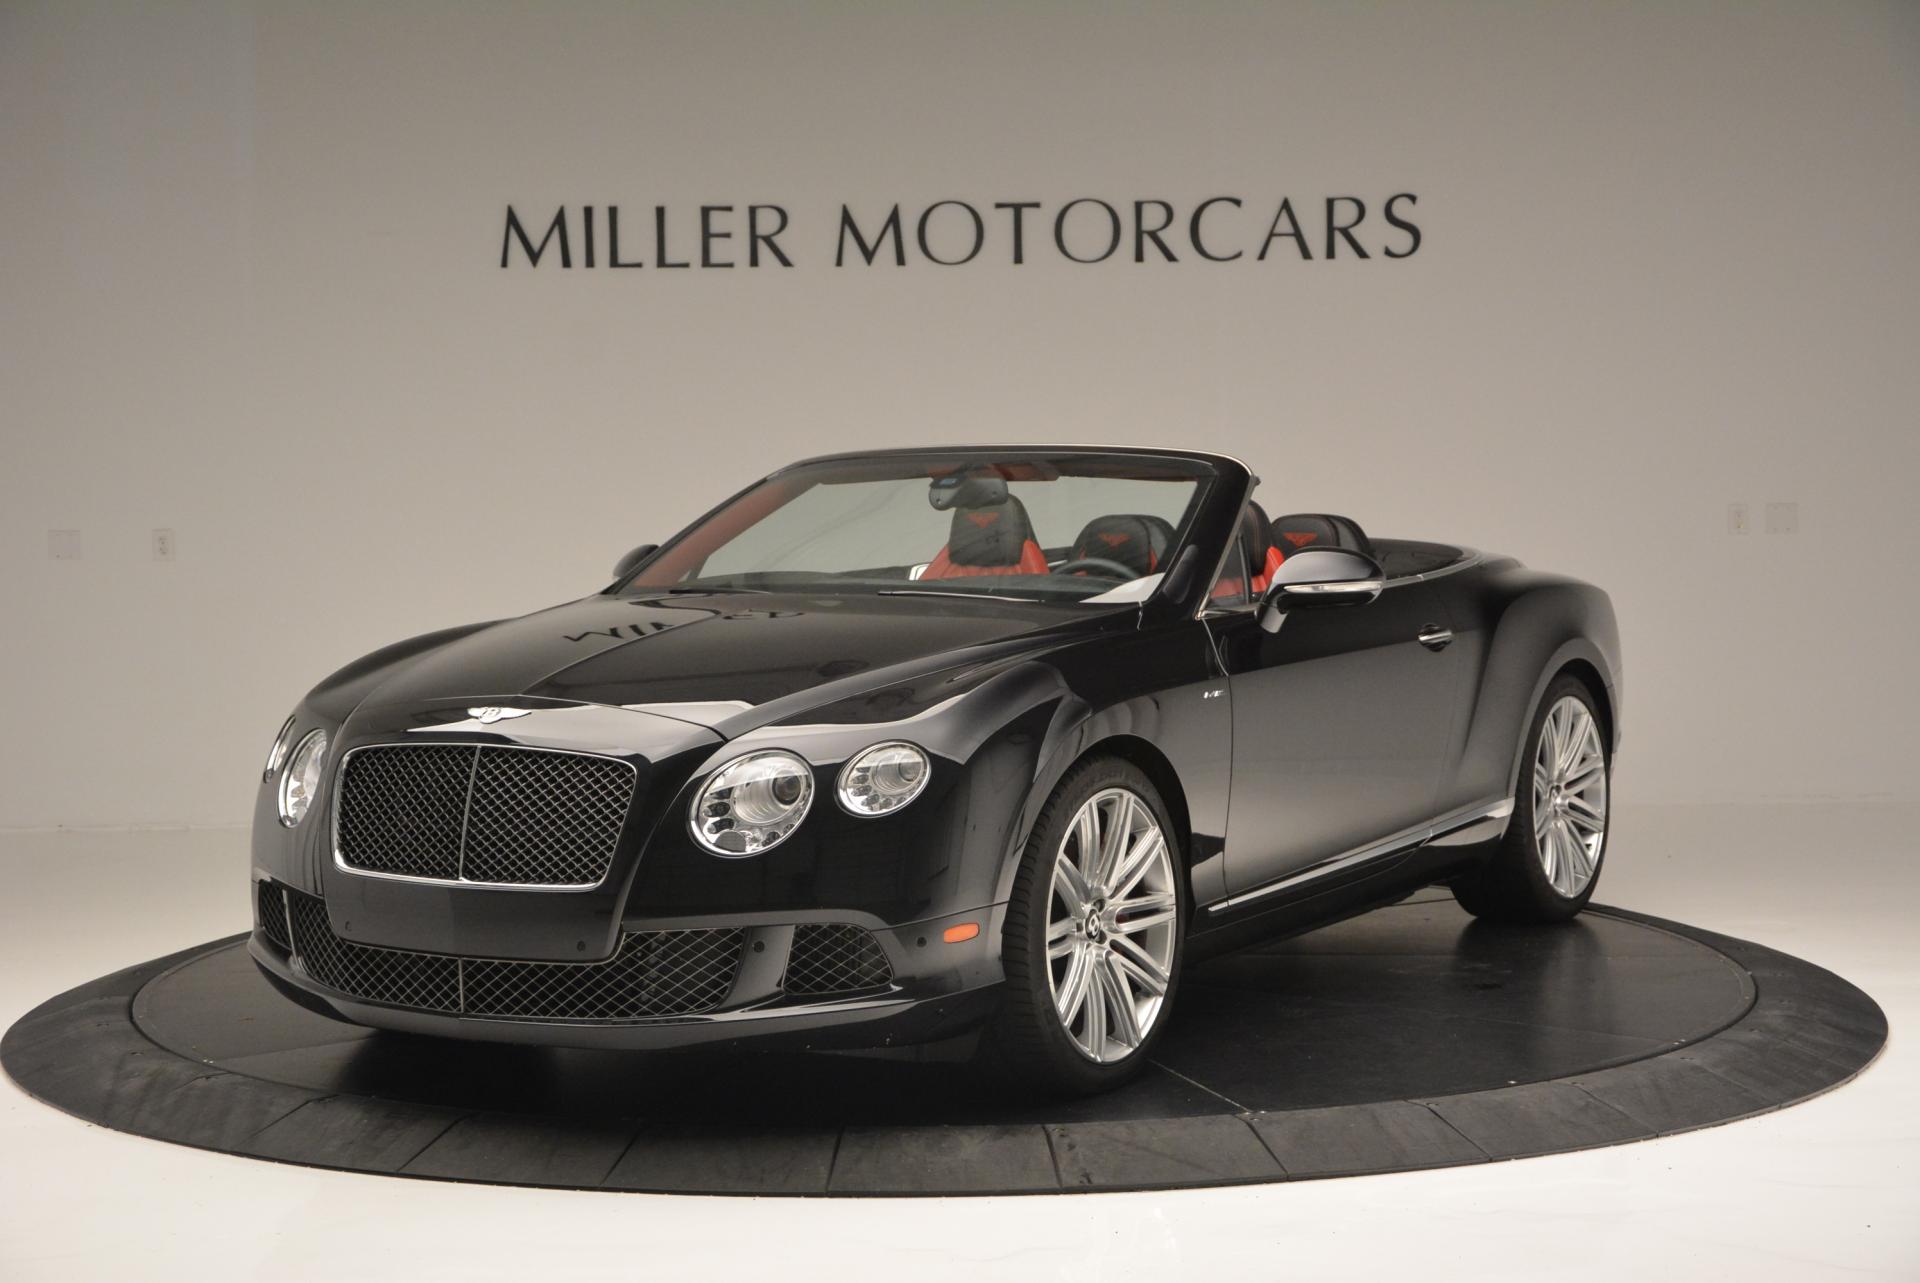 Pre Owned 14 Bentley Continental Gt Speed Convertible For Sale Miller Motorcars Stock 7001